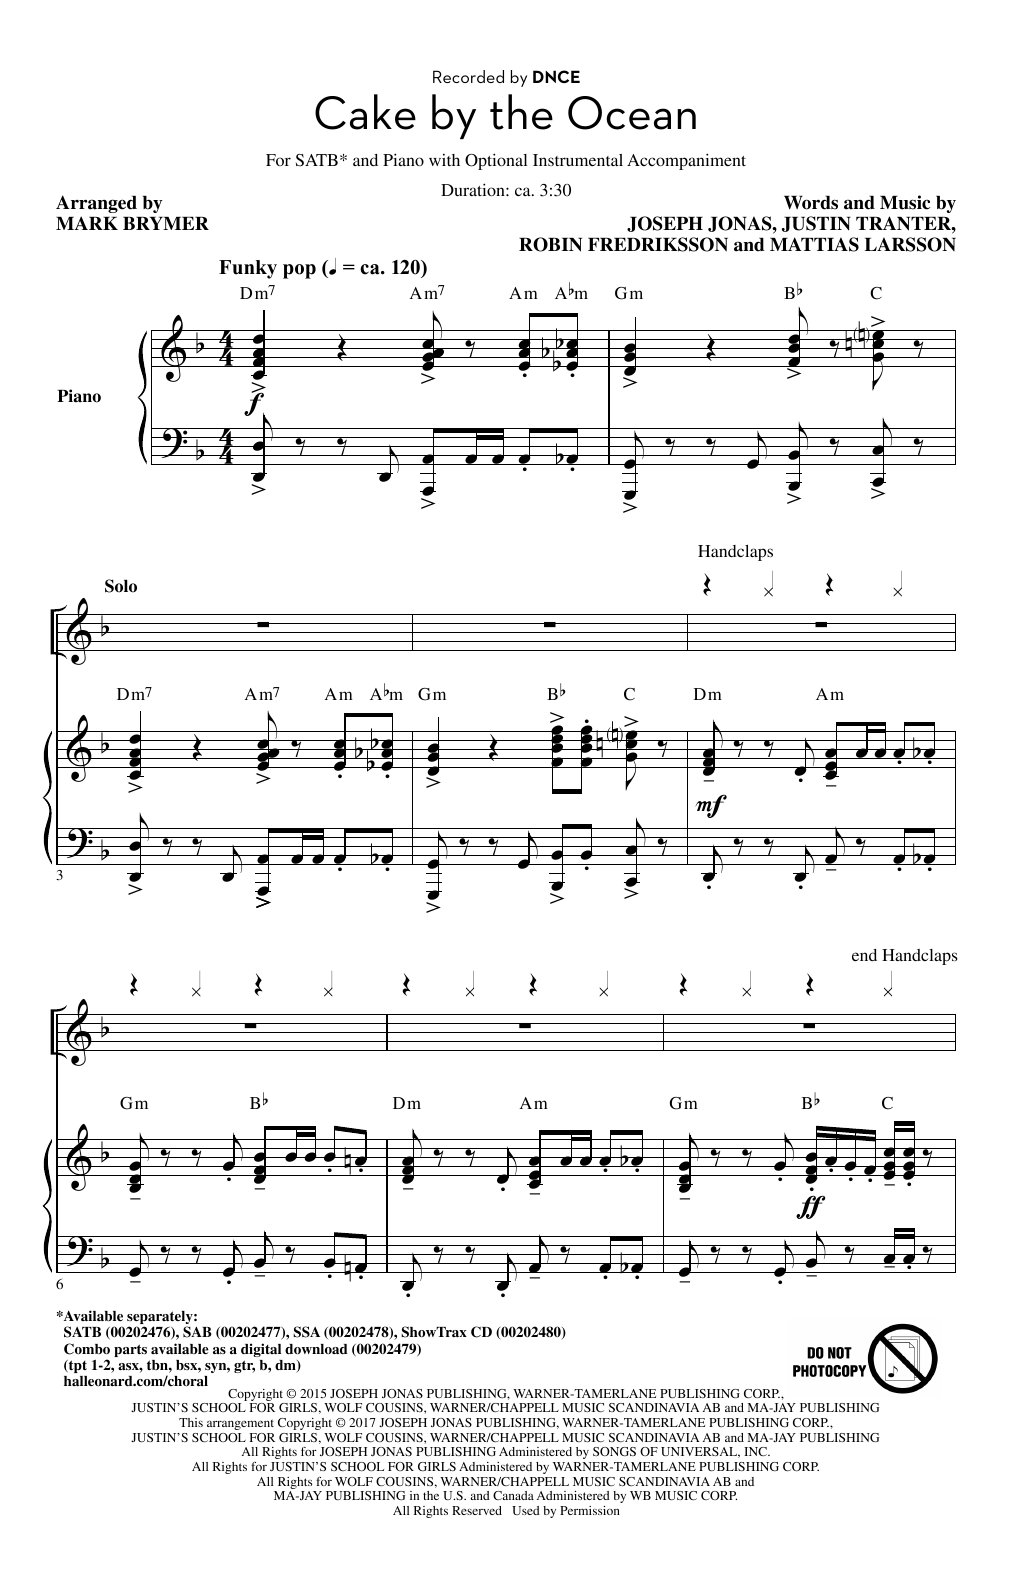 DNCE Cake By The Ocean (feat. Mark Brymer) sheet music notes and chords. Download Printable PDF.